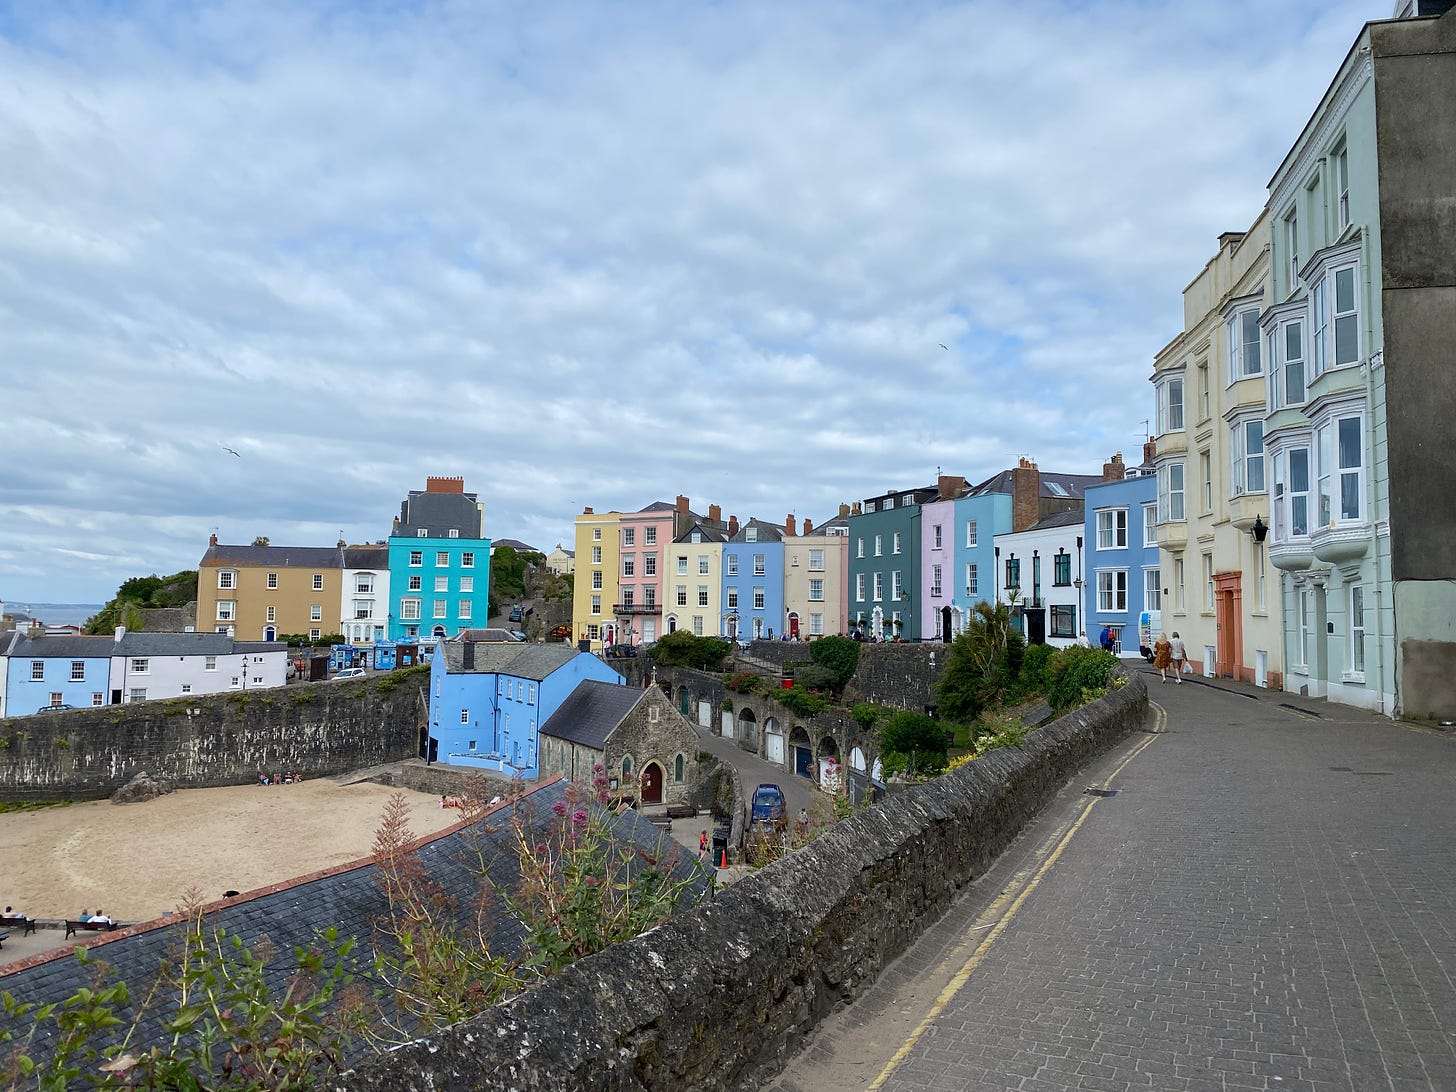 Colourful Tenby, Pembrokeshire, Wales 